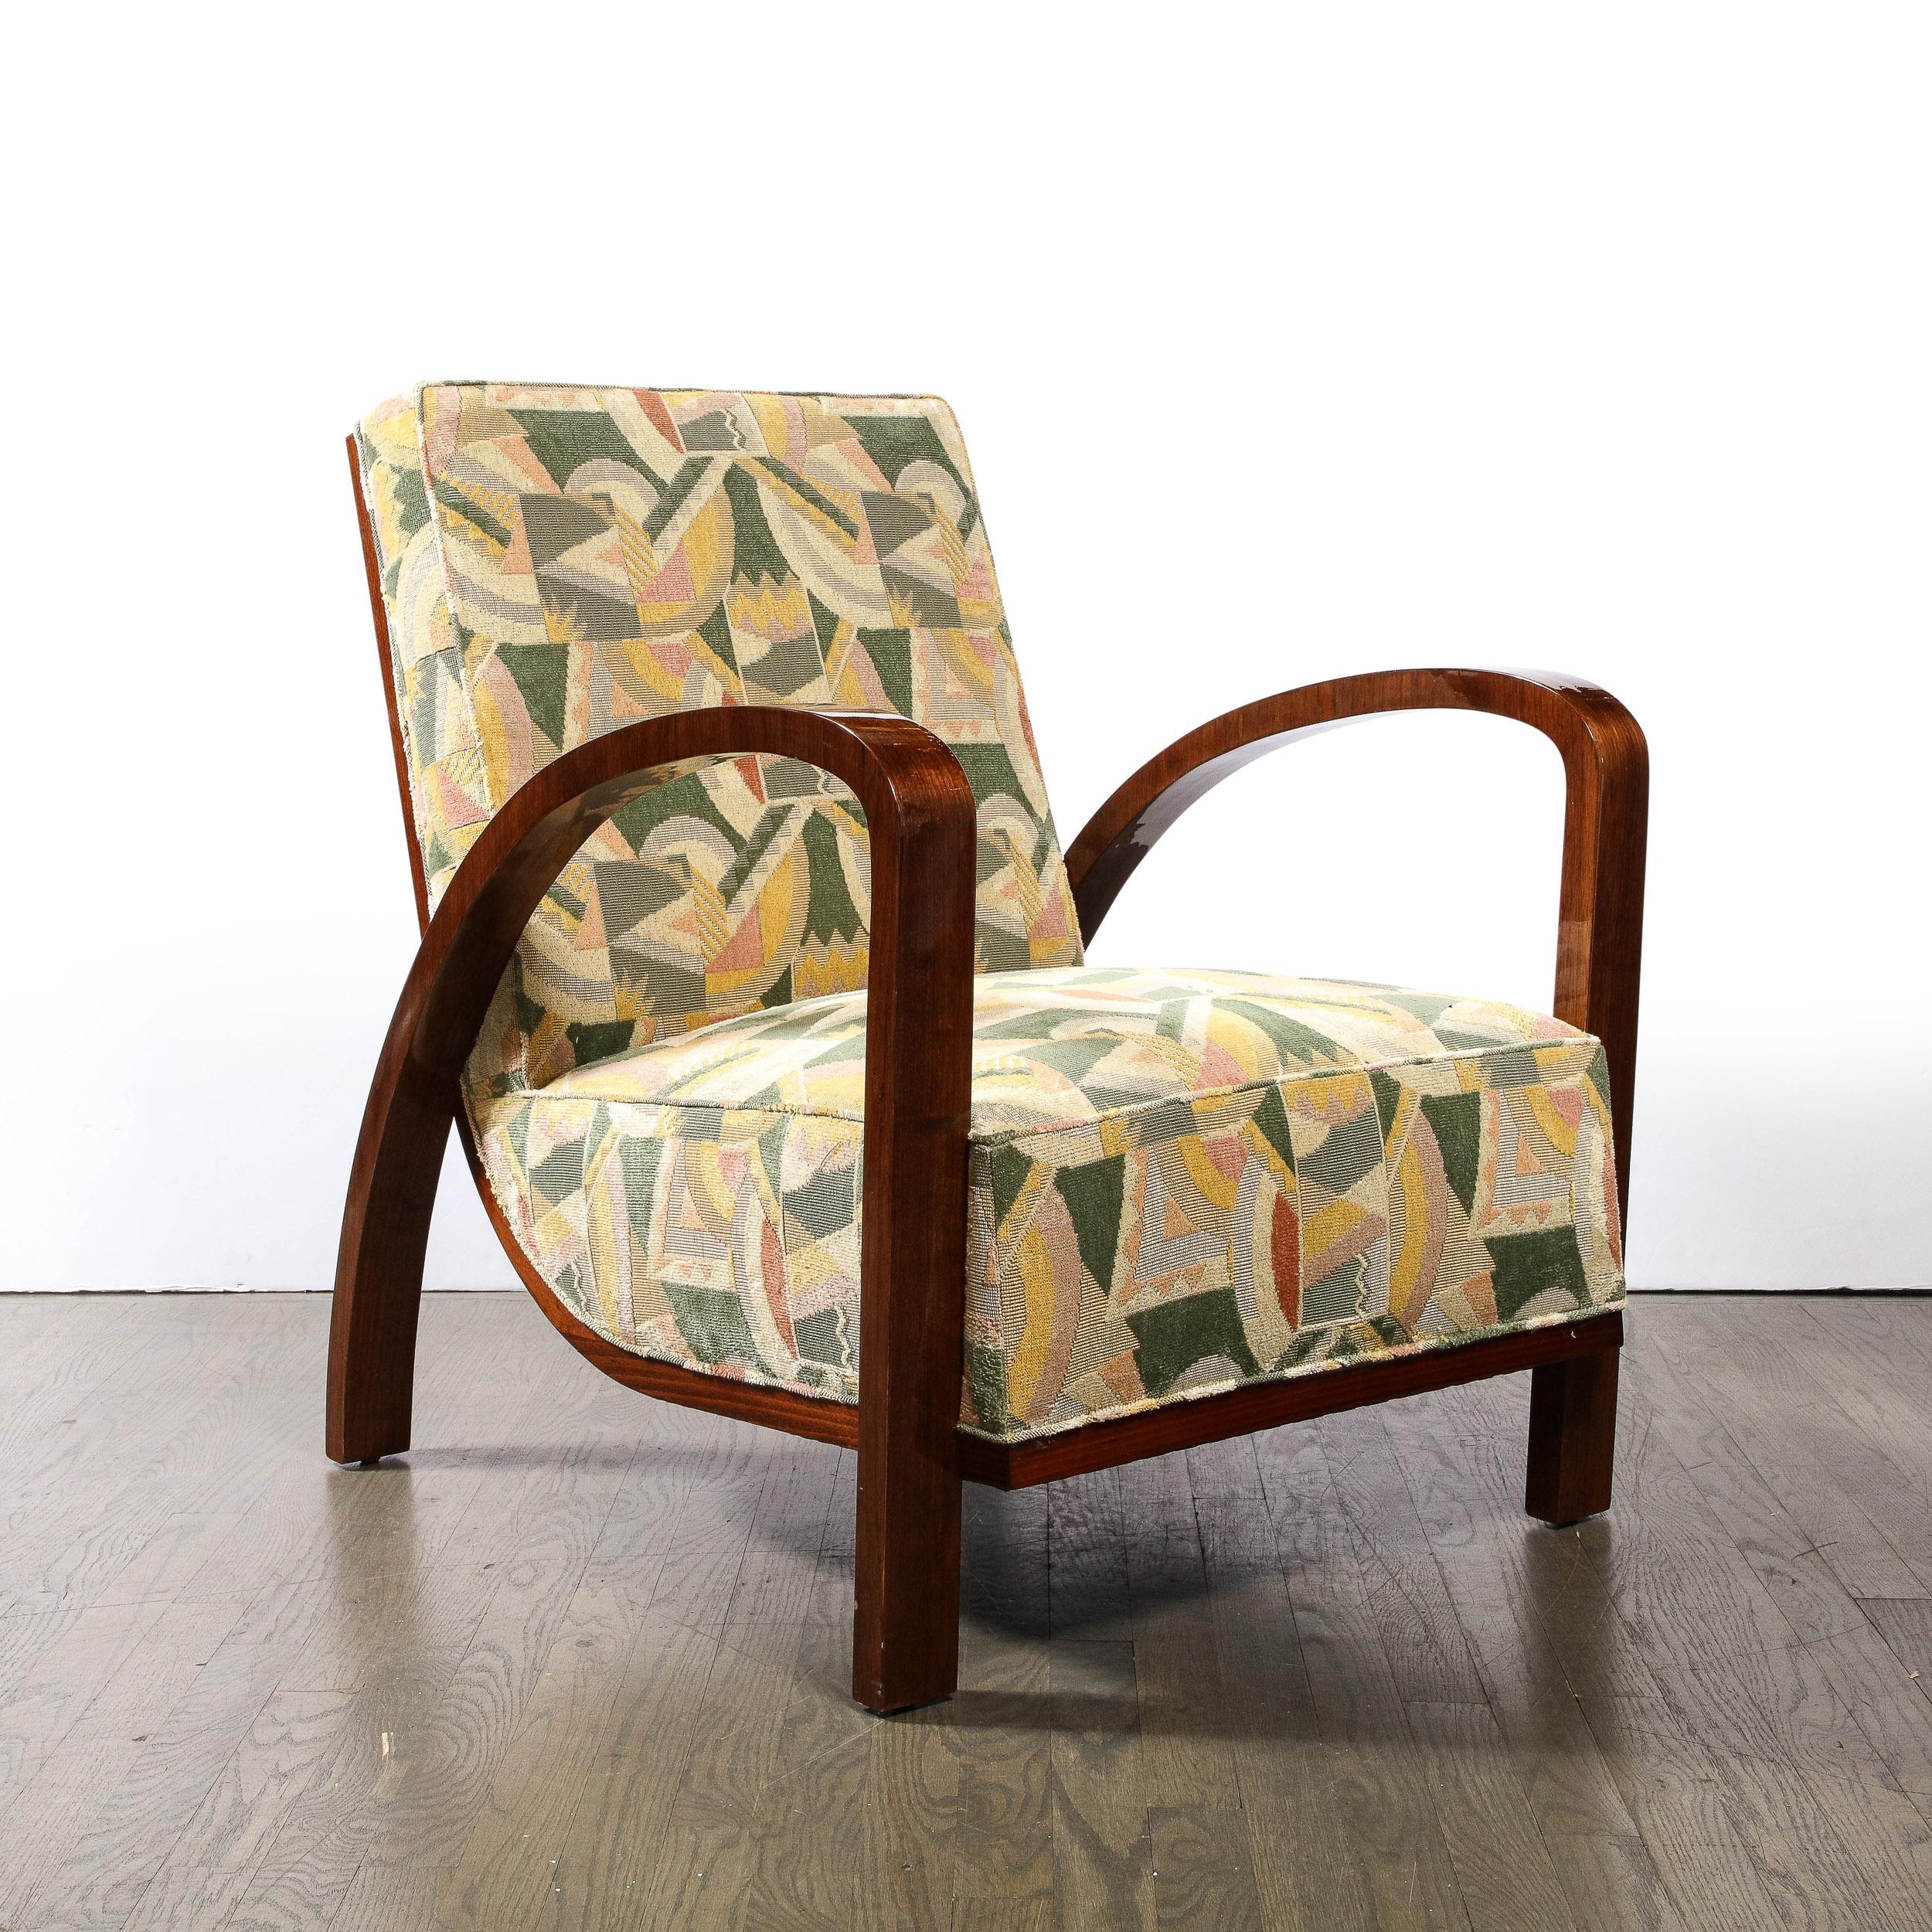 Pair of Art Deco Halabala Arm Chairs in Walnut & Rare Clarence House Fabric For Sale 8